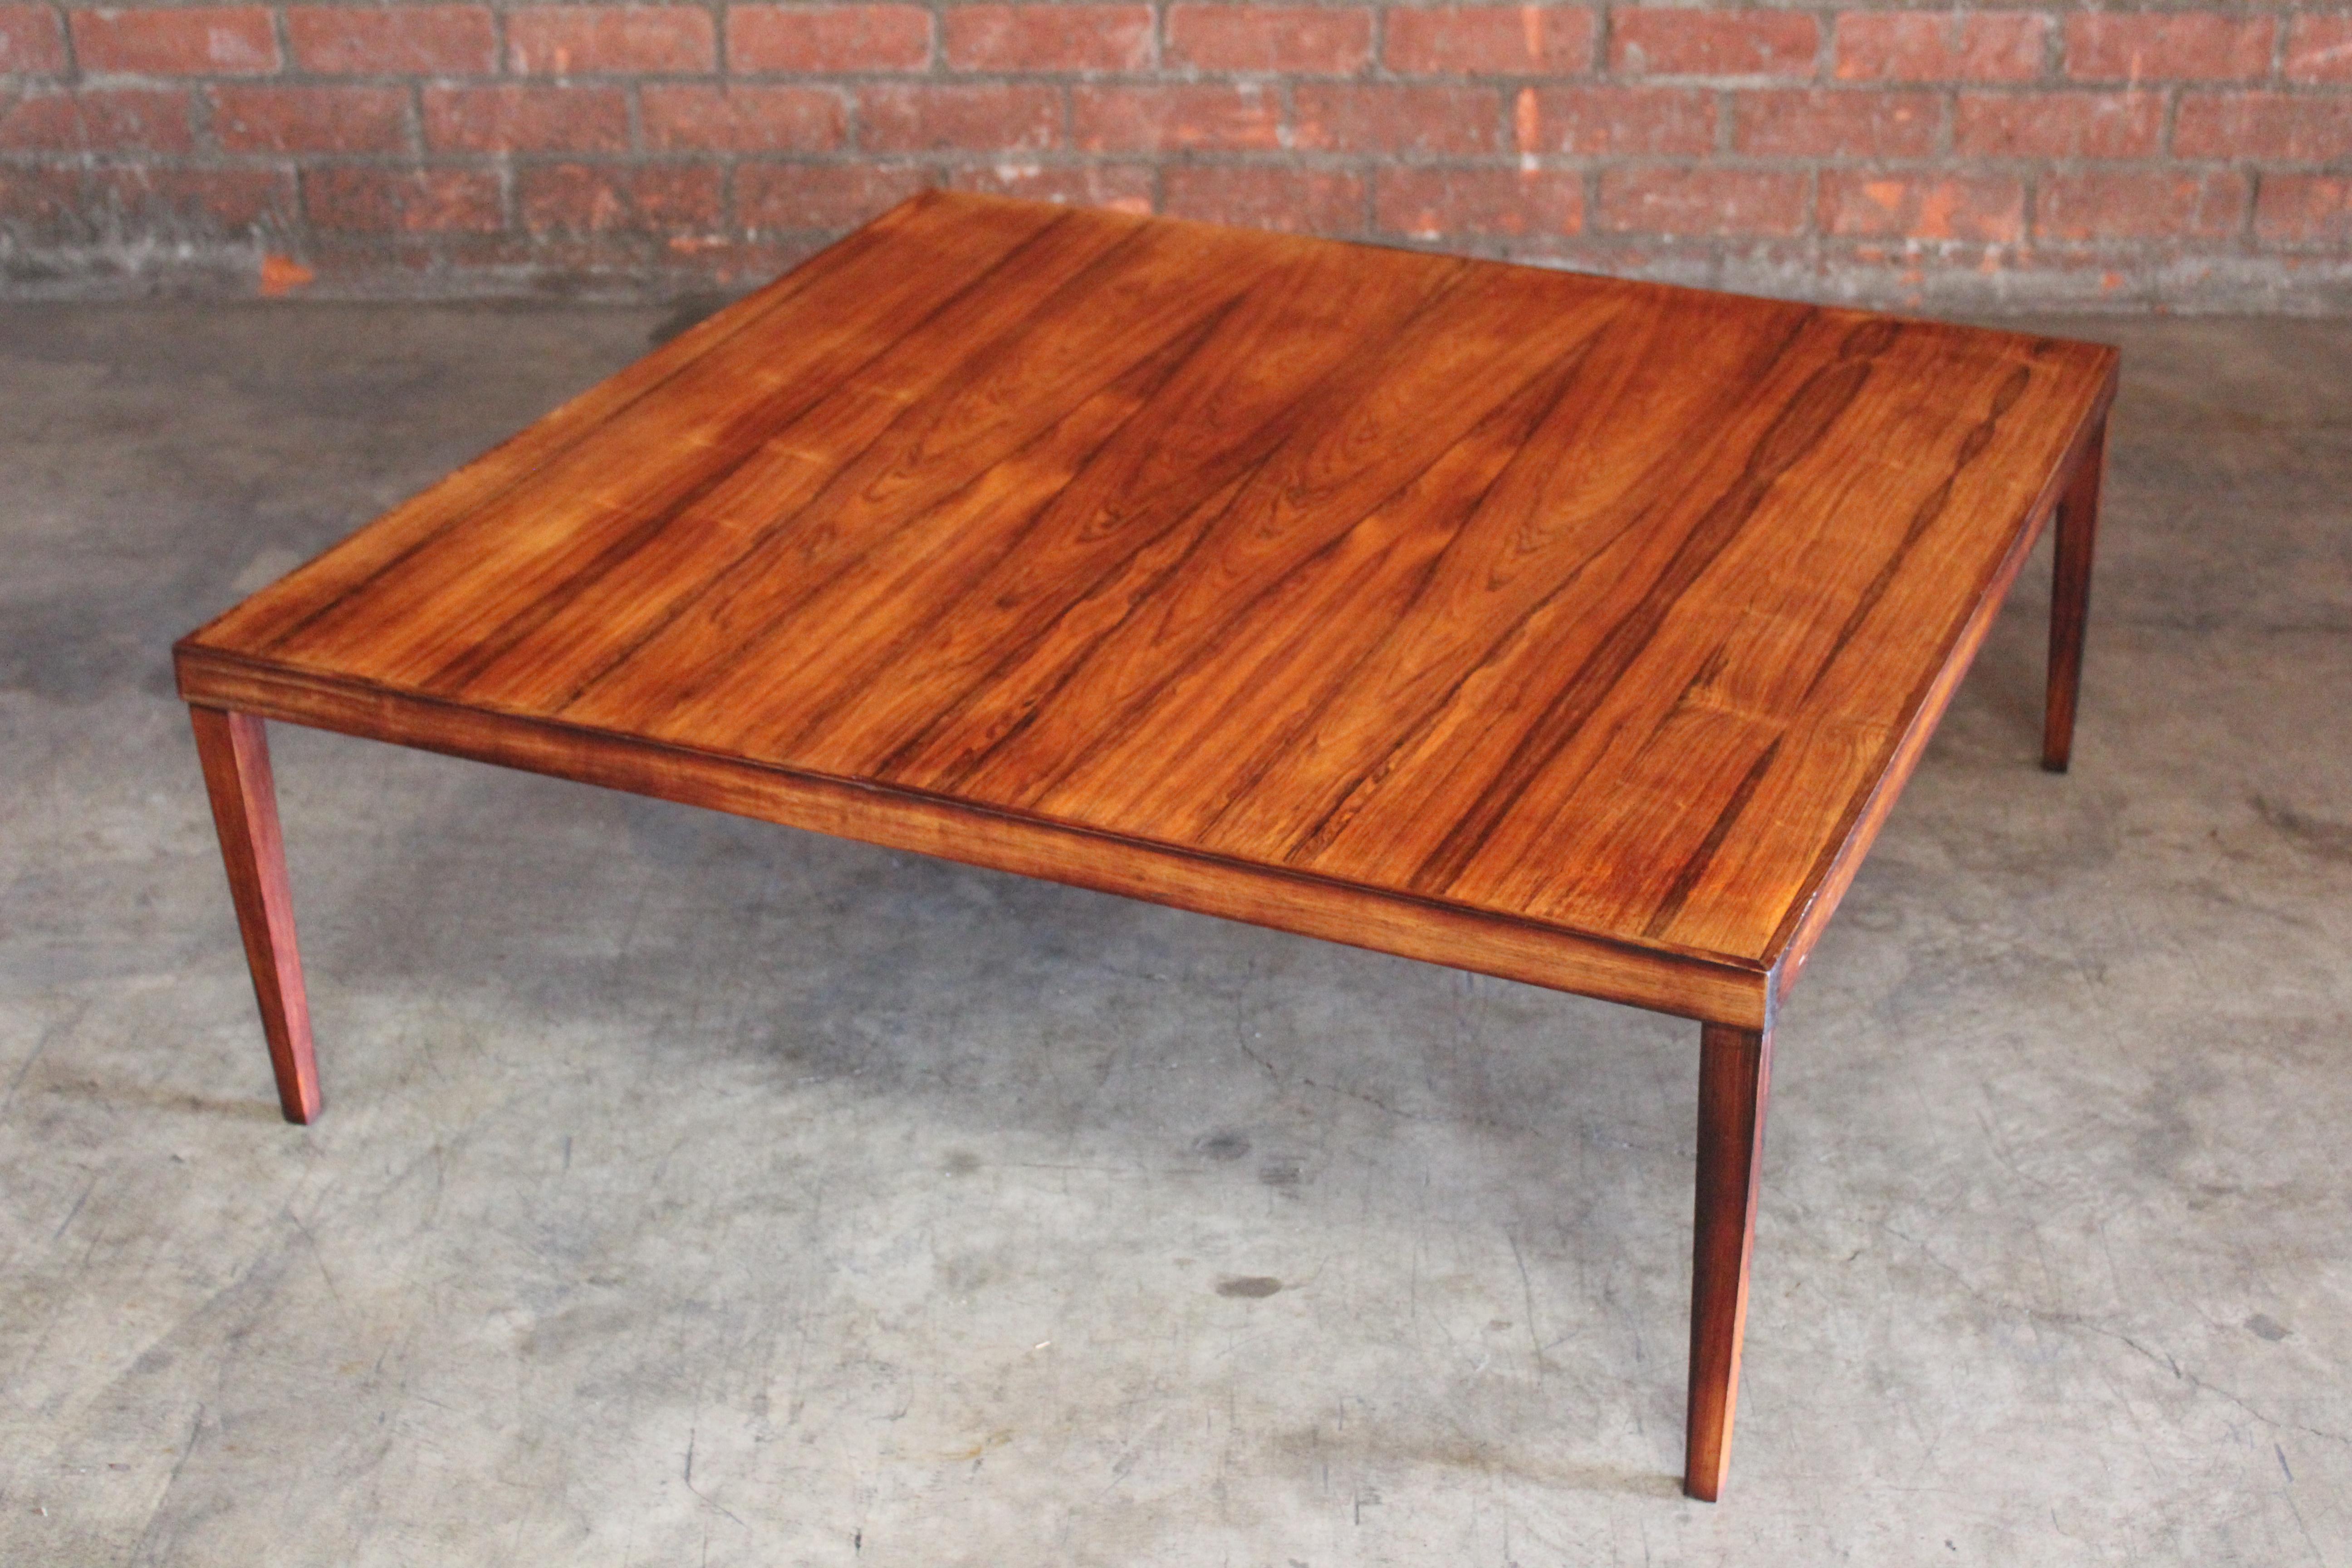 A vintage 1960s Danish coffee table in Brazilian rosewood. In good original condition with some wear. Minor fading on the surface and some veneer loss on the corner.